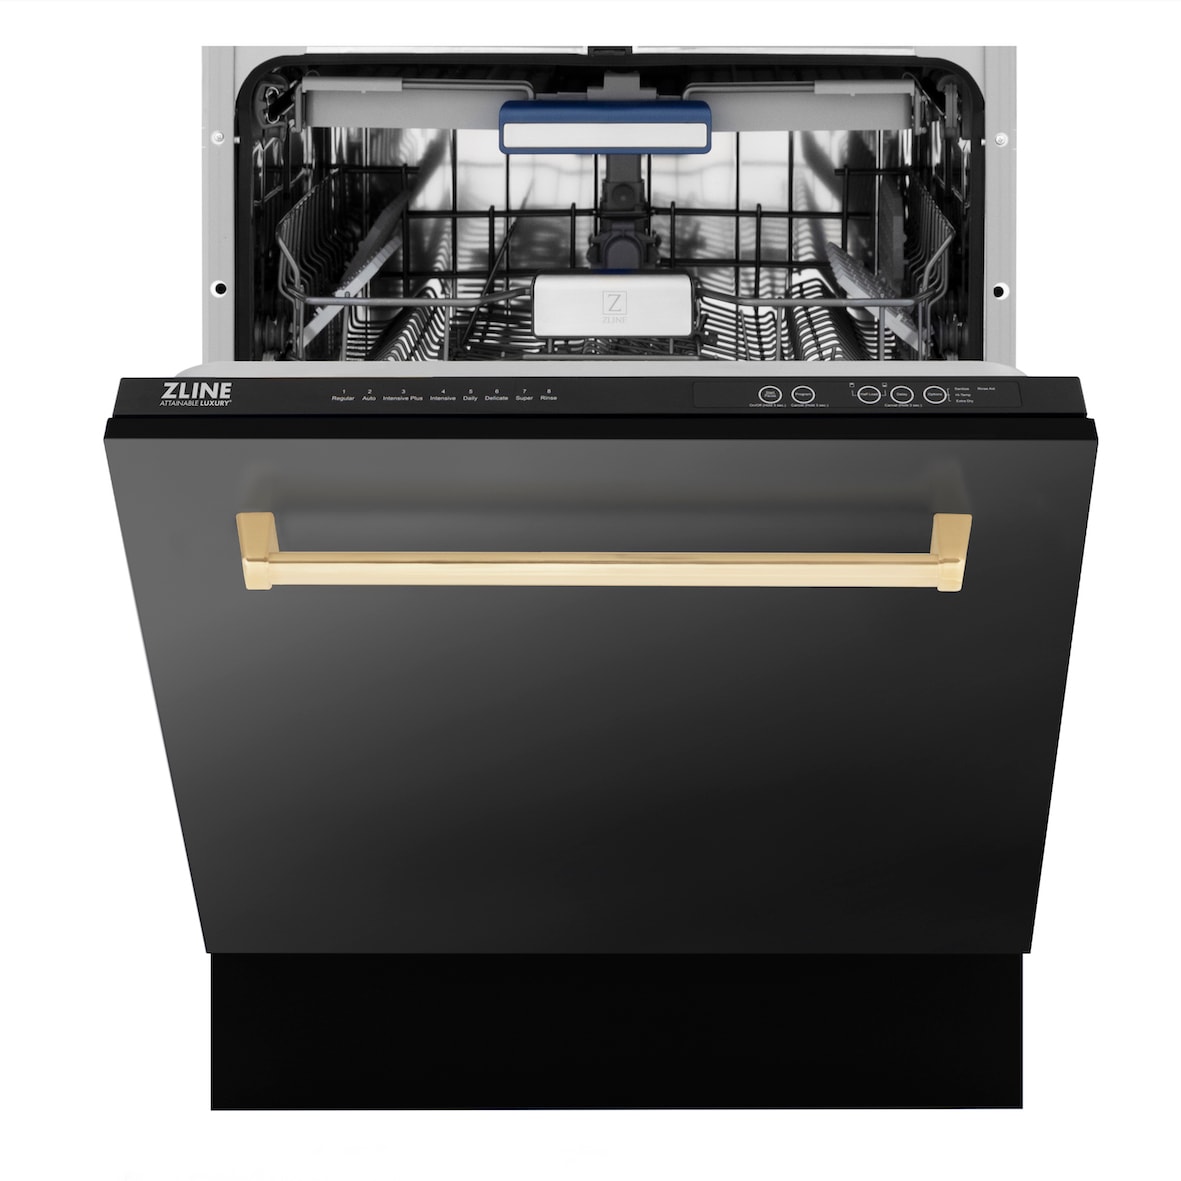 ZLINE Autograph Edition 18 Compact 3rd Rack Top Control Dishwasher in Black Stainless Steel with Champagne Bronze Handle (DWVZ-BS-18-CB)